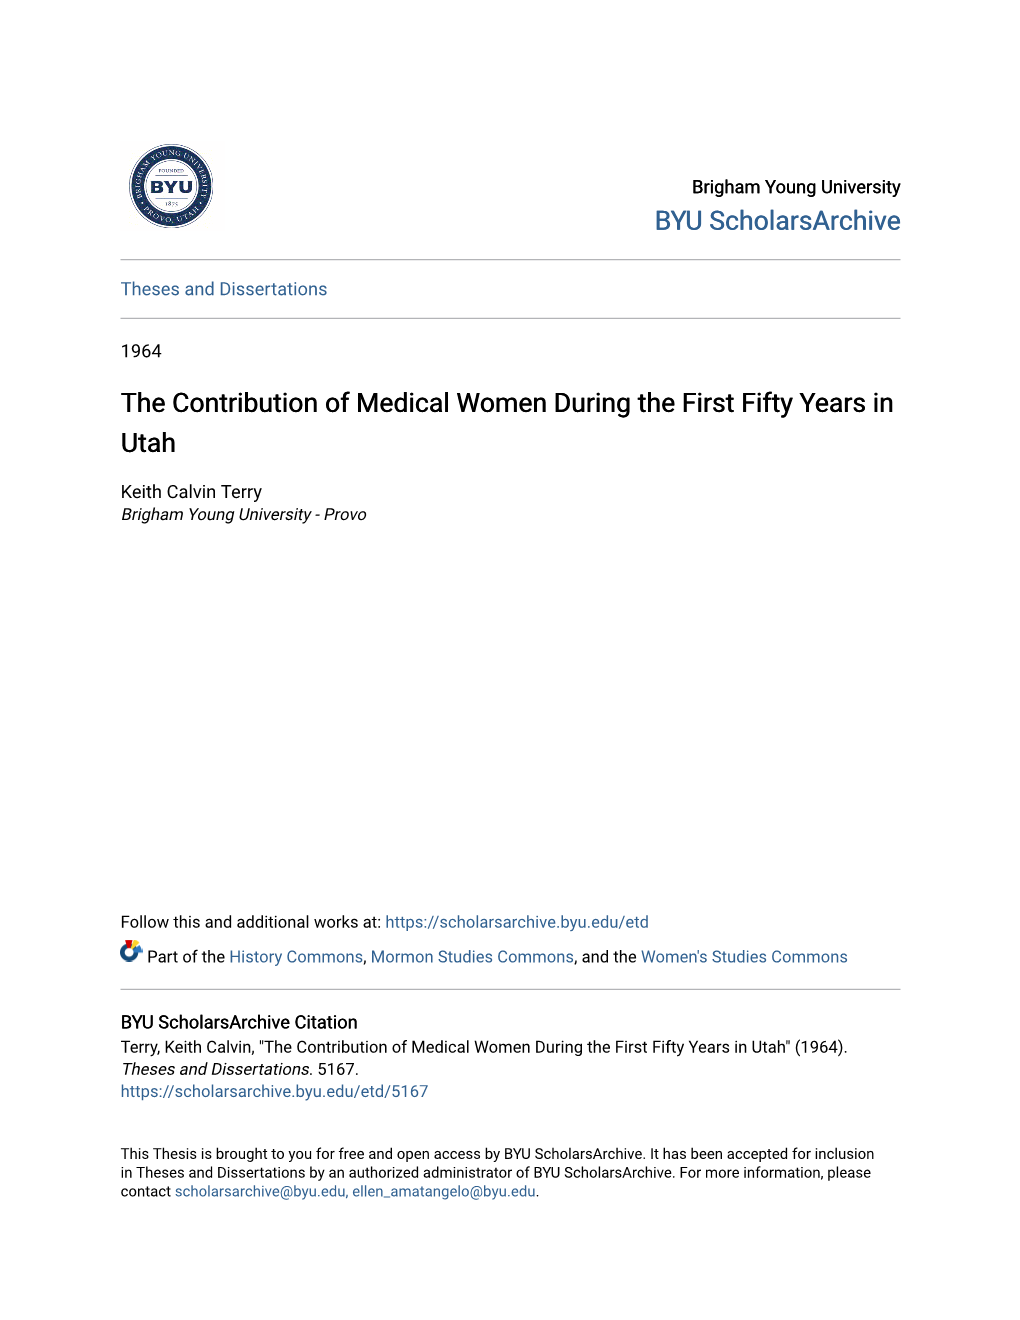 The Contribution of Medical Women During the First Fifty Years in Utah